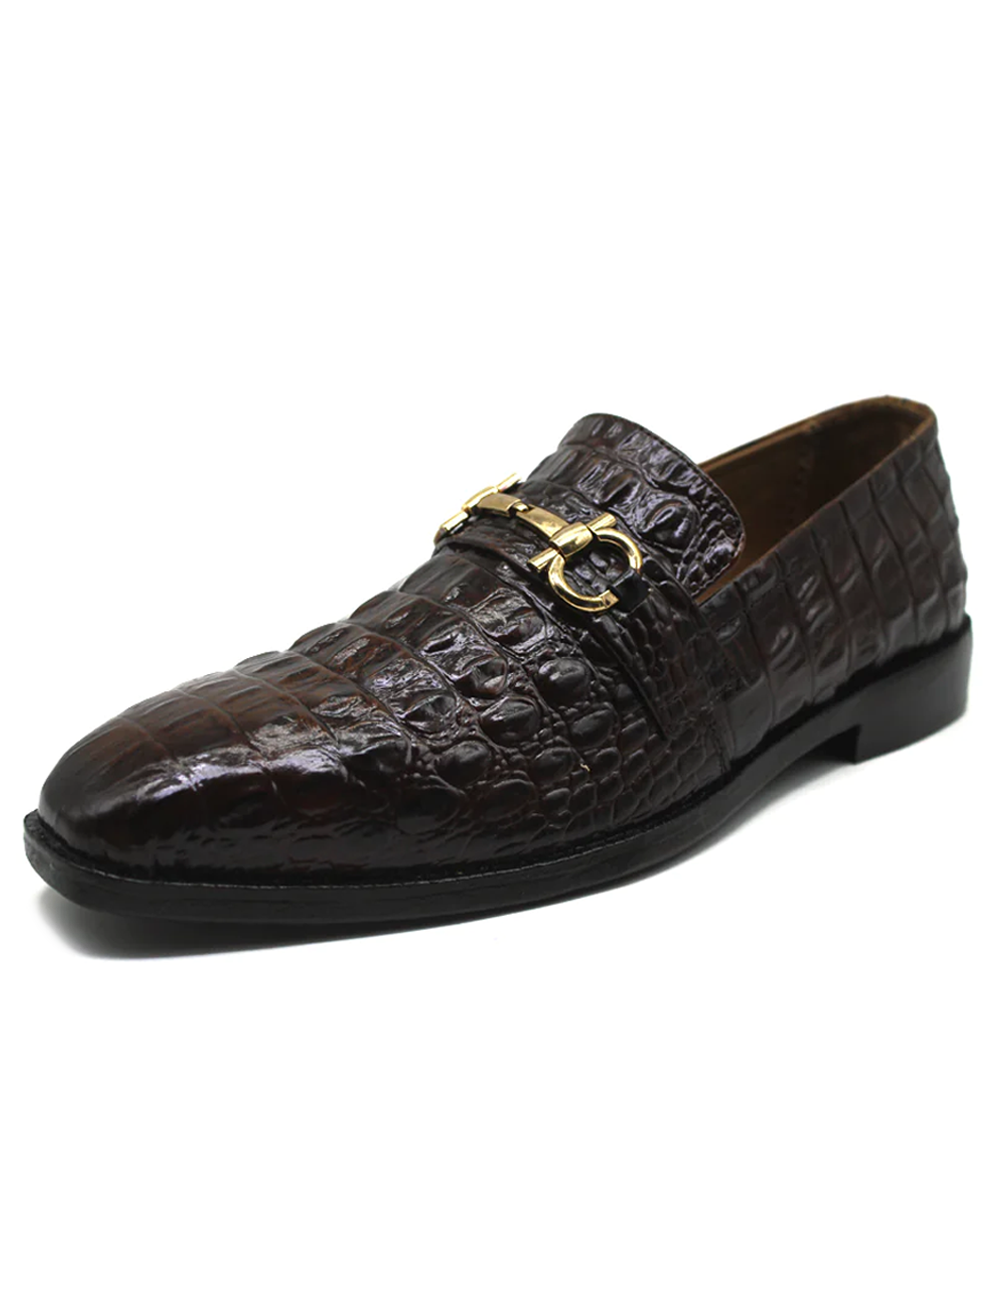 Pure Leather's Stylish Moccasin For Men